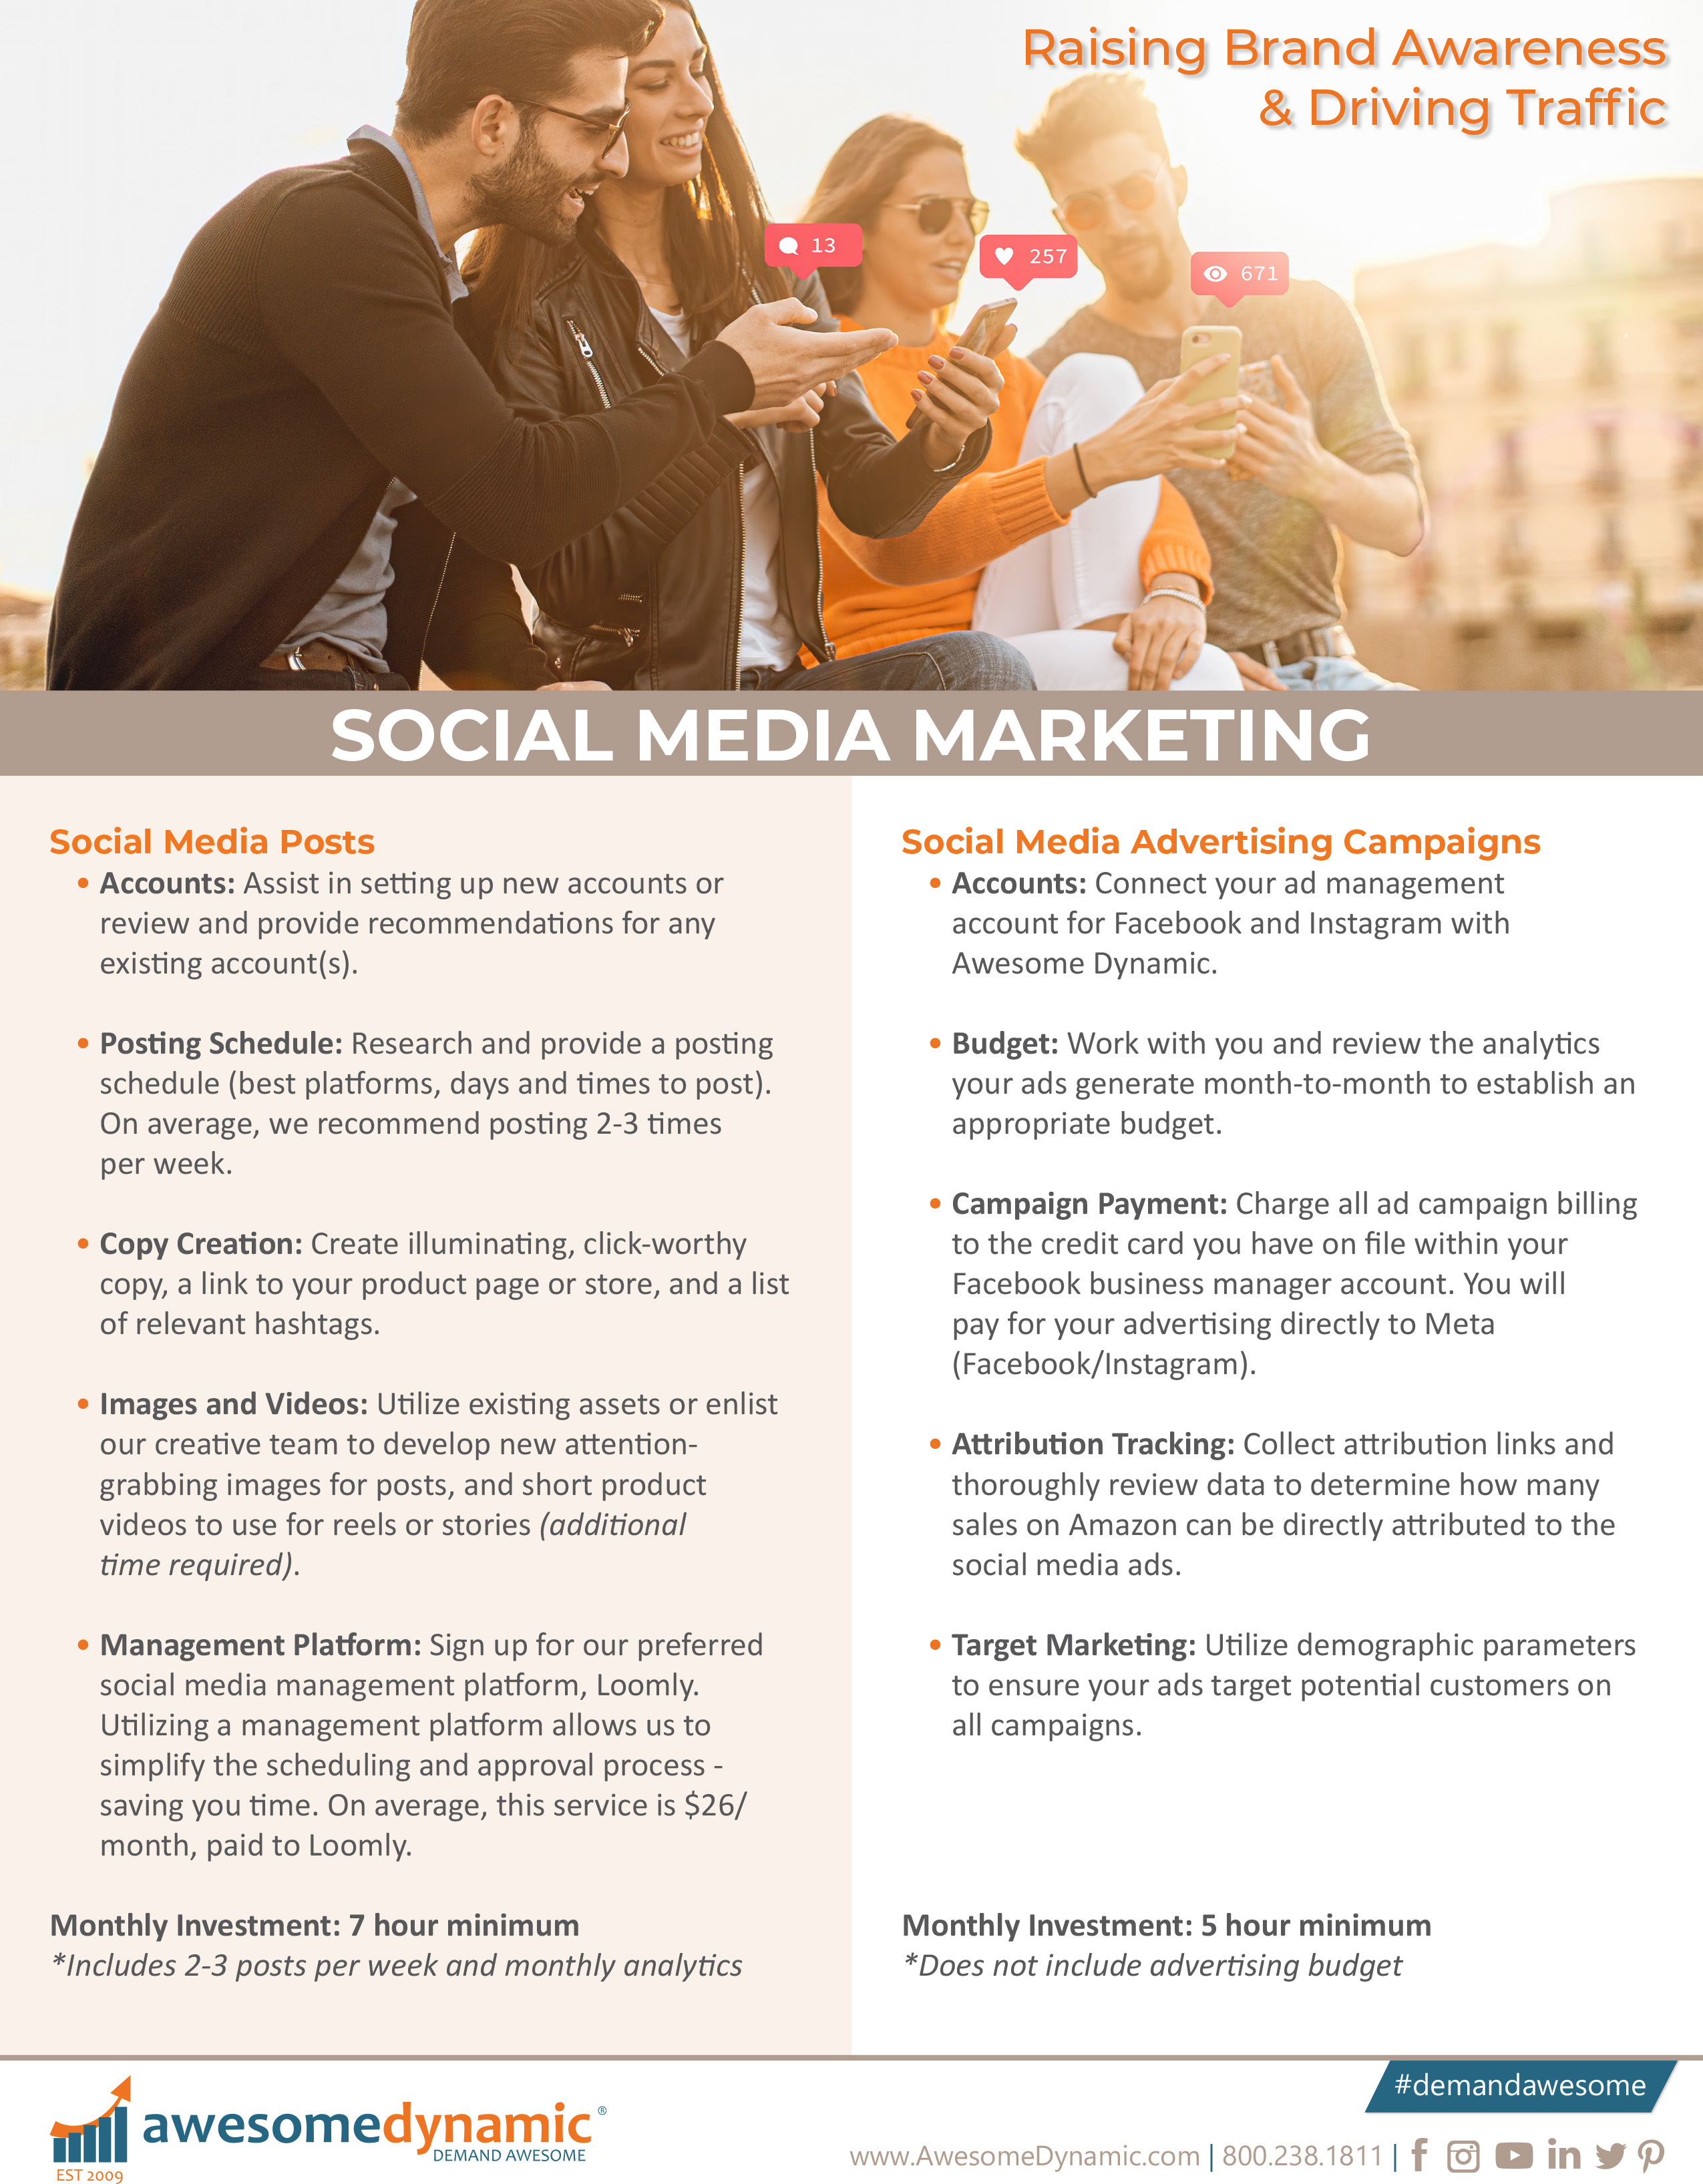 Social Media Marketing with Awesome Dynamic - Services Page with information on social media management and advertising